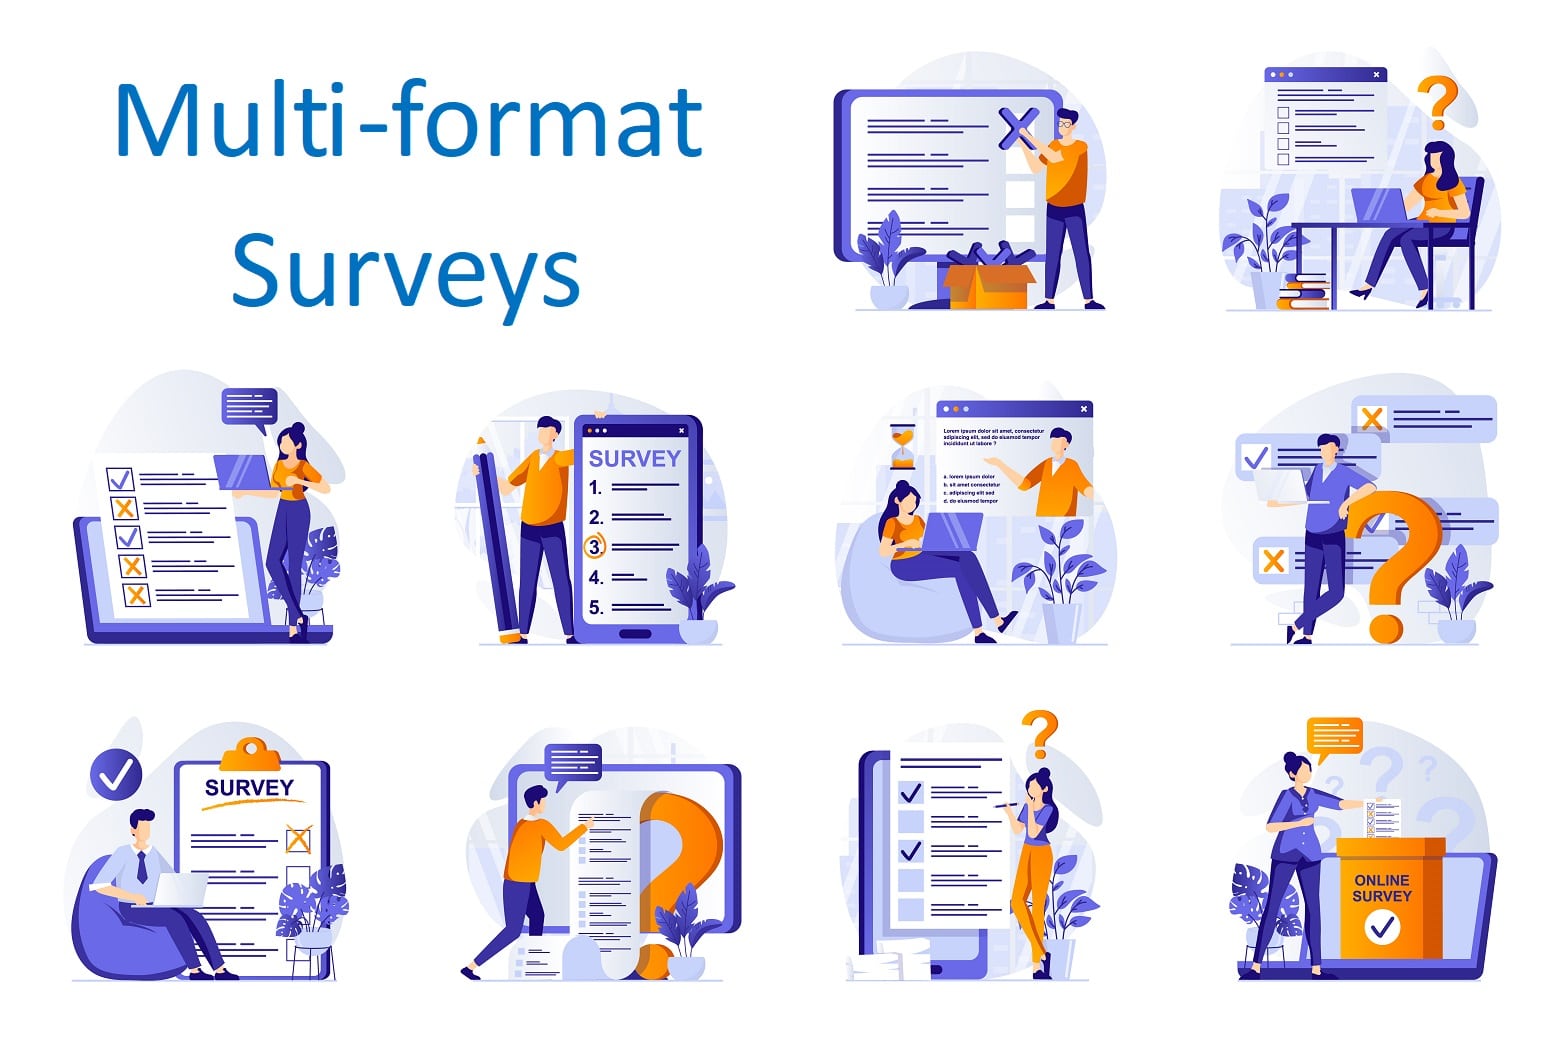 Multi-format surveys boost employee participation and help HR managers gather verified employee sentiment on a range of issues